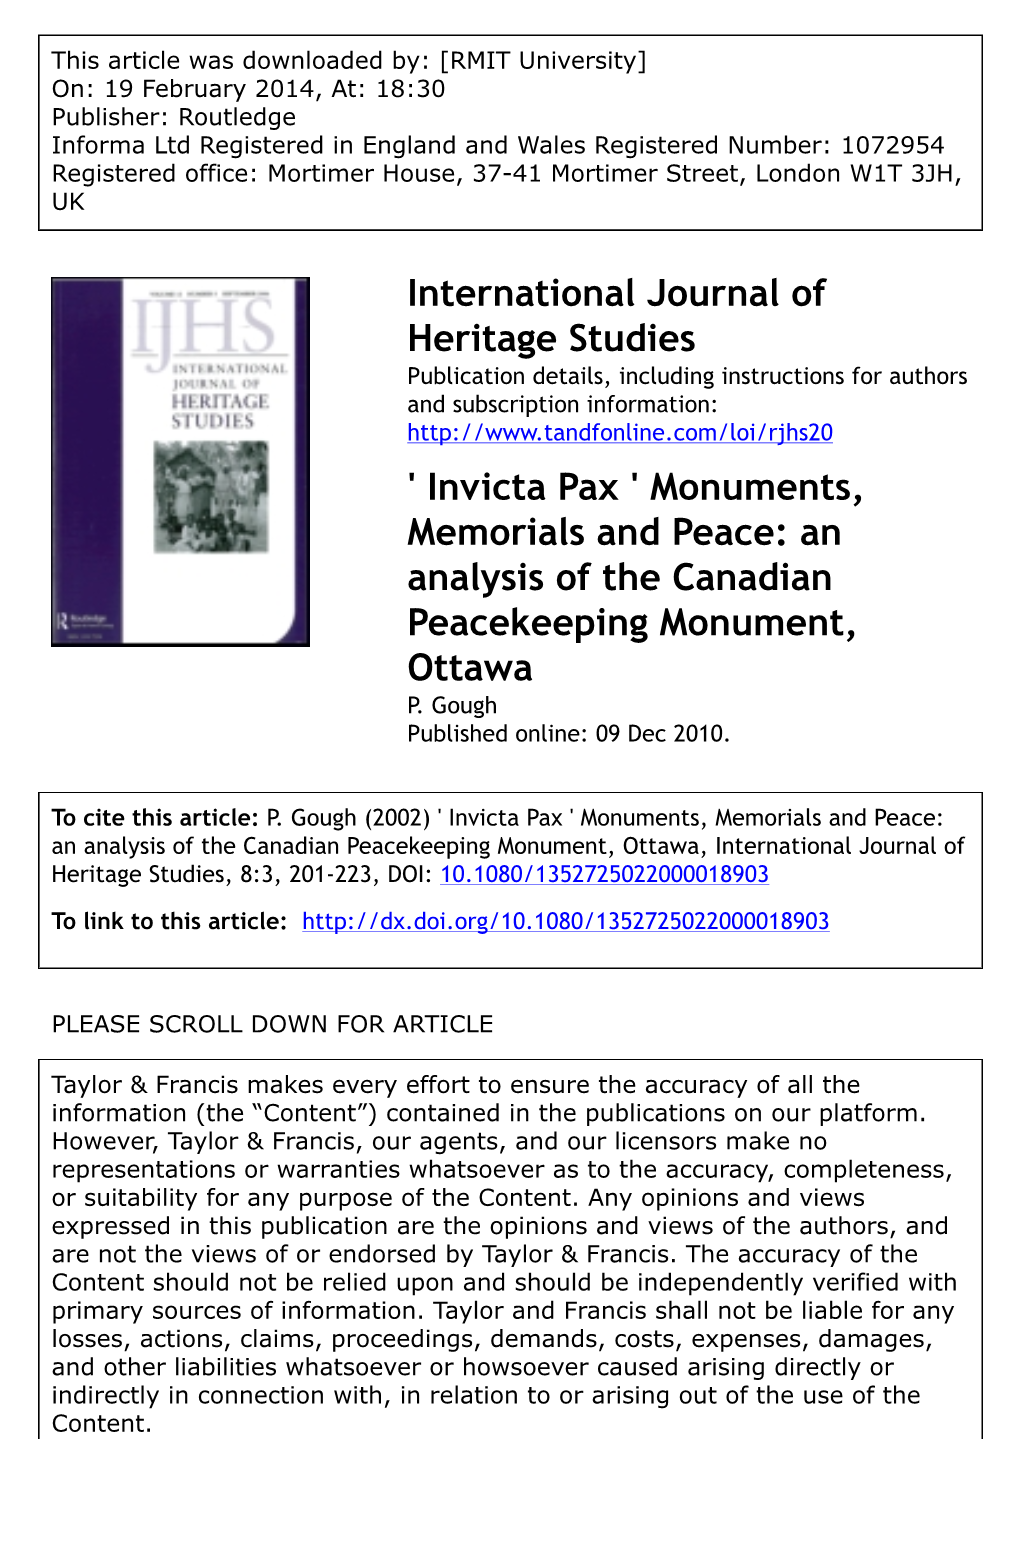 'Invicta Pax' Monuments, Memorials and Peace: an Analysis of The